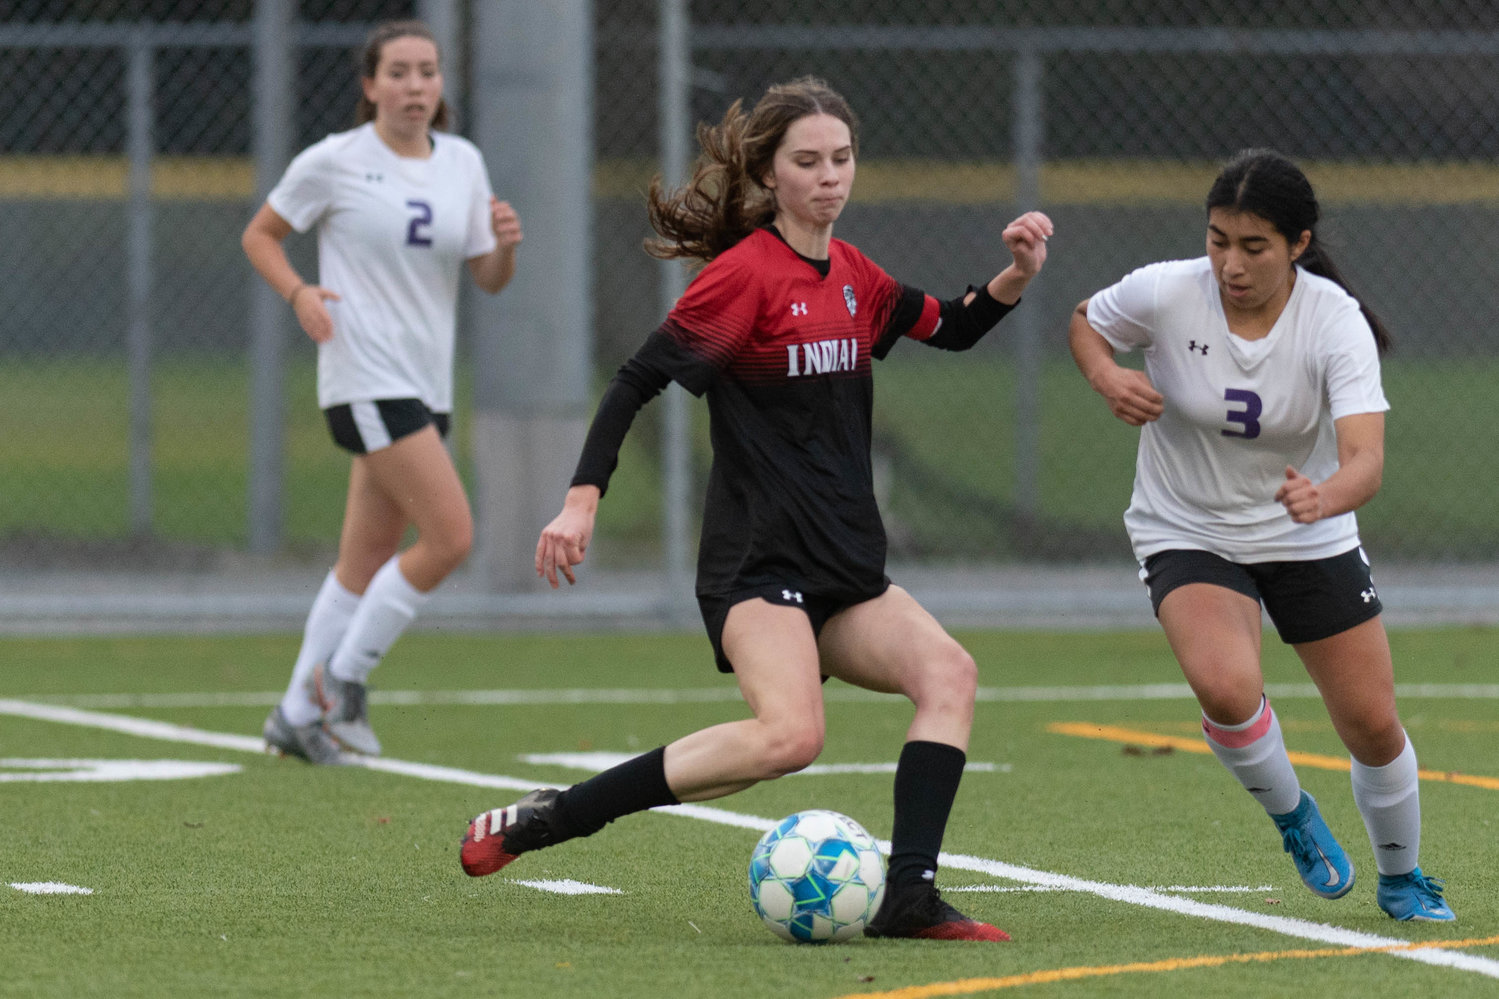 Toledo's Marina Smith sends a shot toward the goal against Friday Harbor in the opening round of the WIAA 2B soccer tournament Nov. 10 in Black Hills.